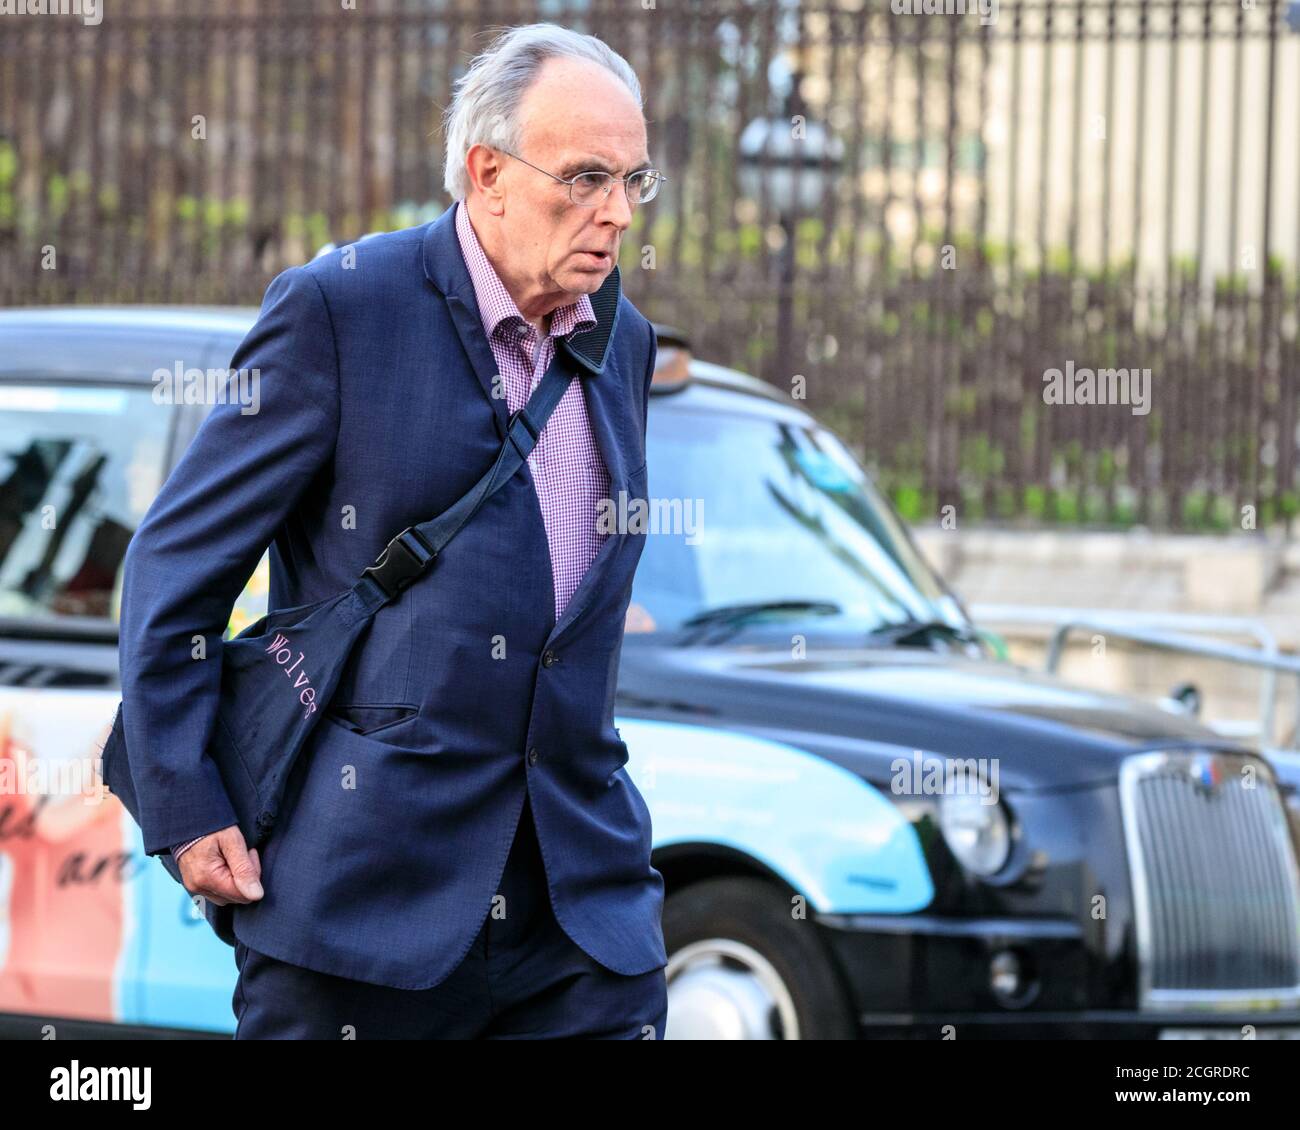 Peter Bone, MP, politician and Conservative Party Member of Parliament for Wellingborough, walking in Westminster, London Stock Photo